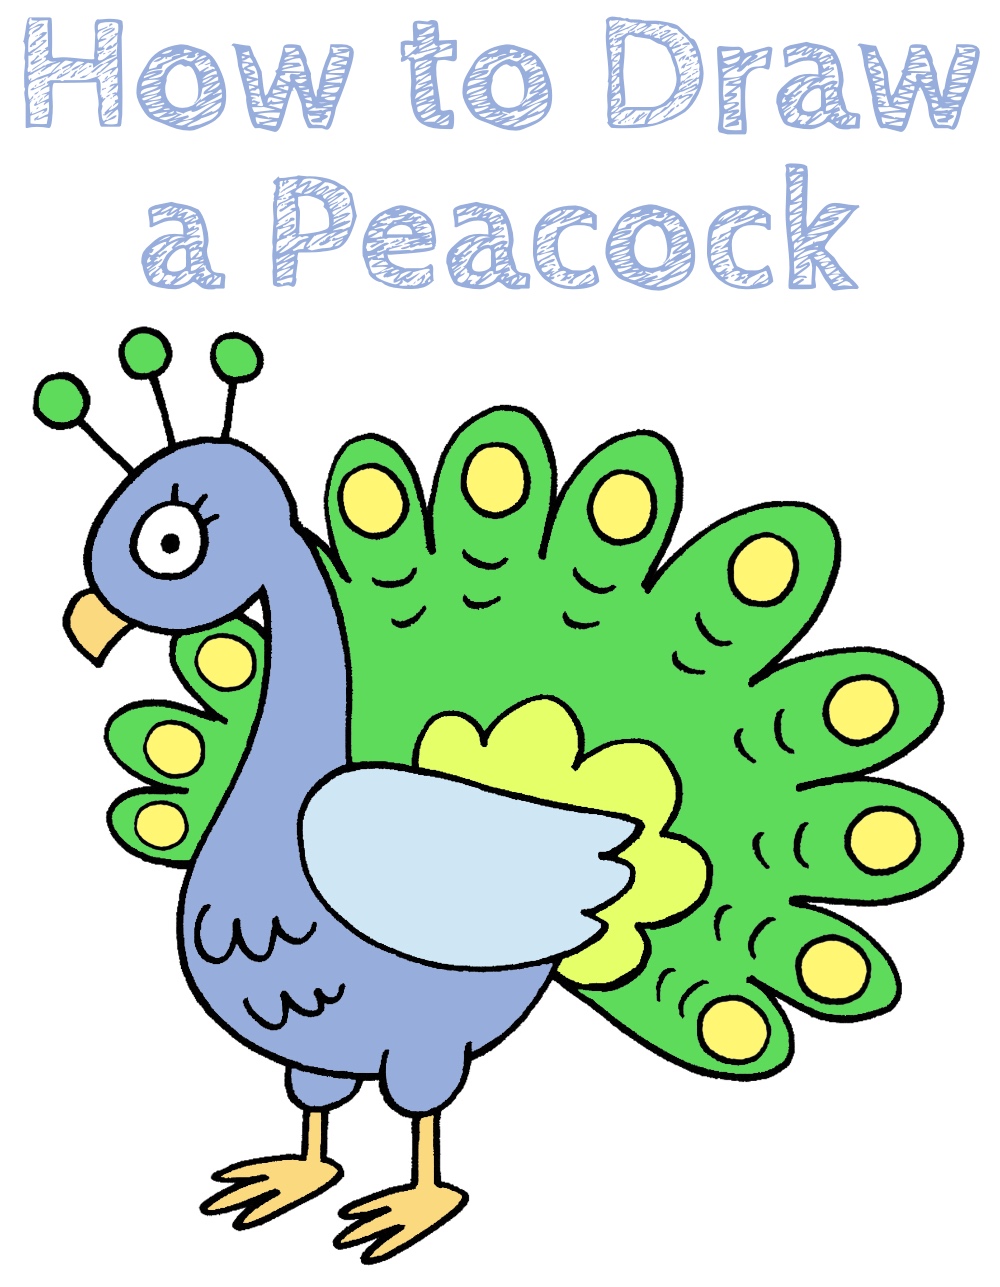 How to Draw a Peacock